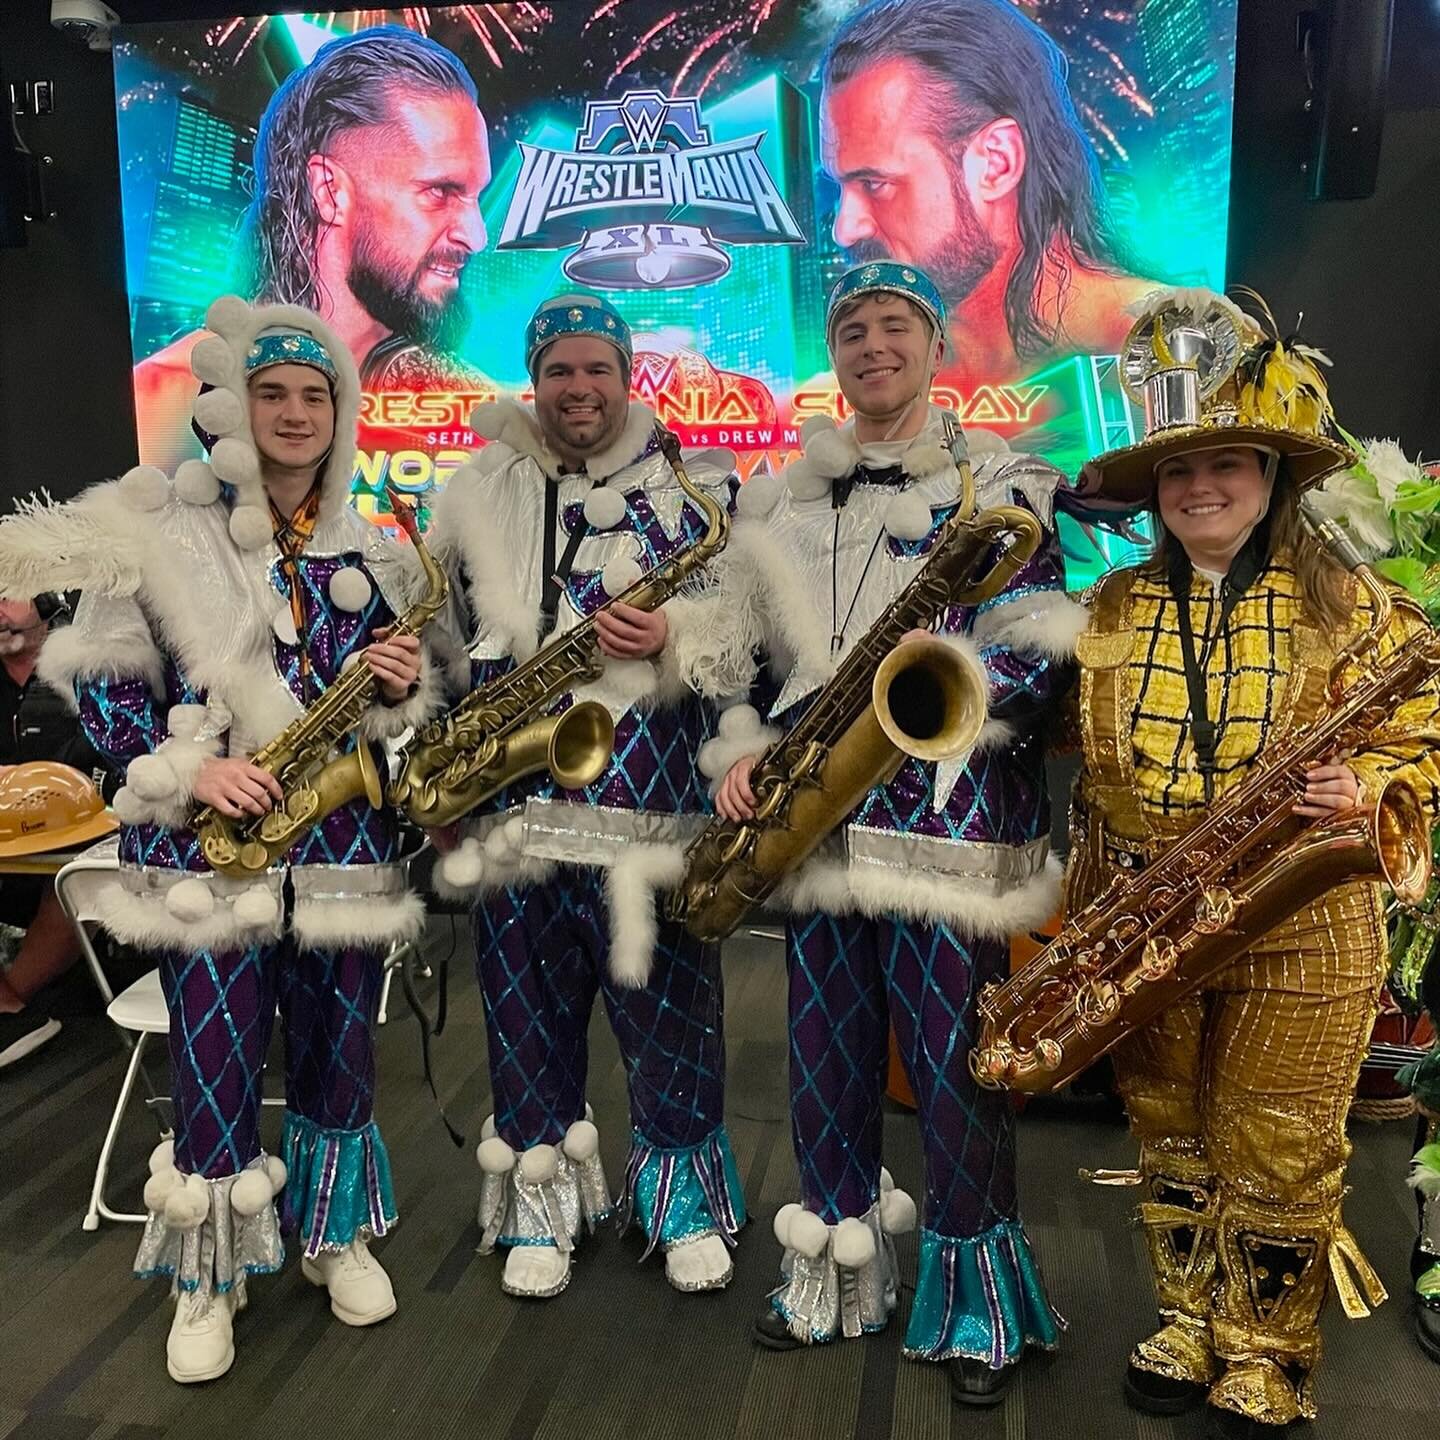 💚Such an amazing experience! This evening some of our members represented the Philadelphia String Band Association at WWE WrestleMania to introduce Seth Rollins! #WrestleMania #WWE #WWERESOFERKO